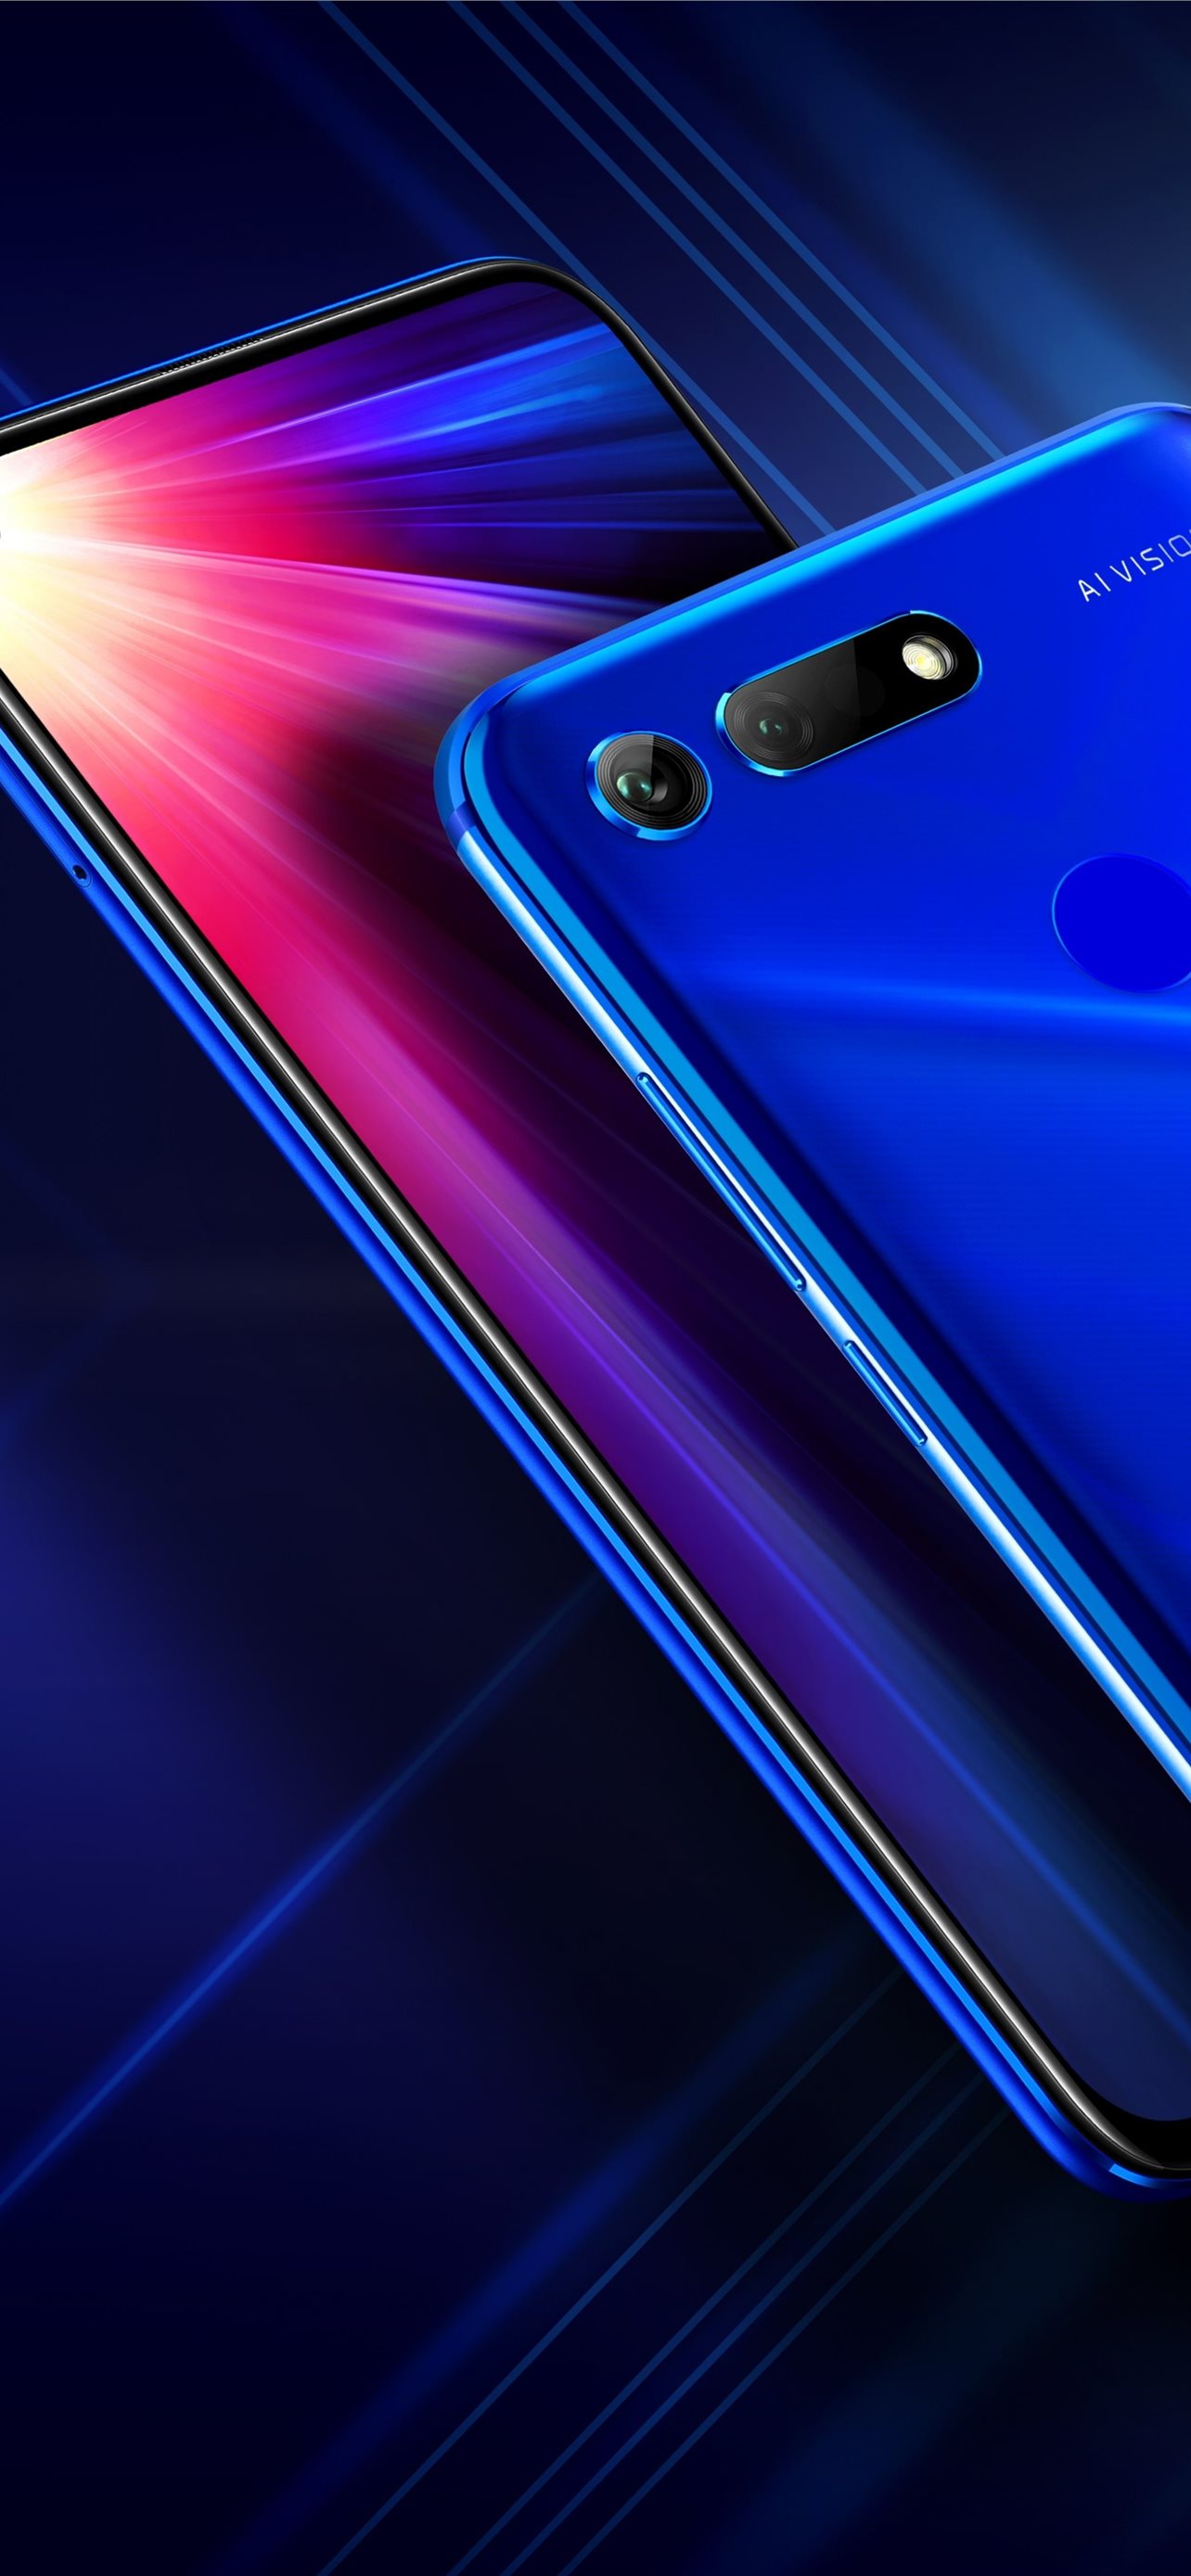 honor view 20 iPhone Wallpapers Free Download